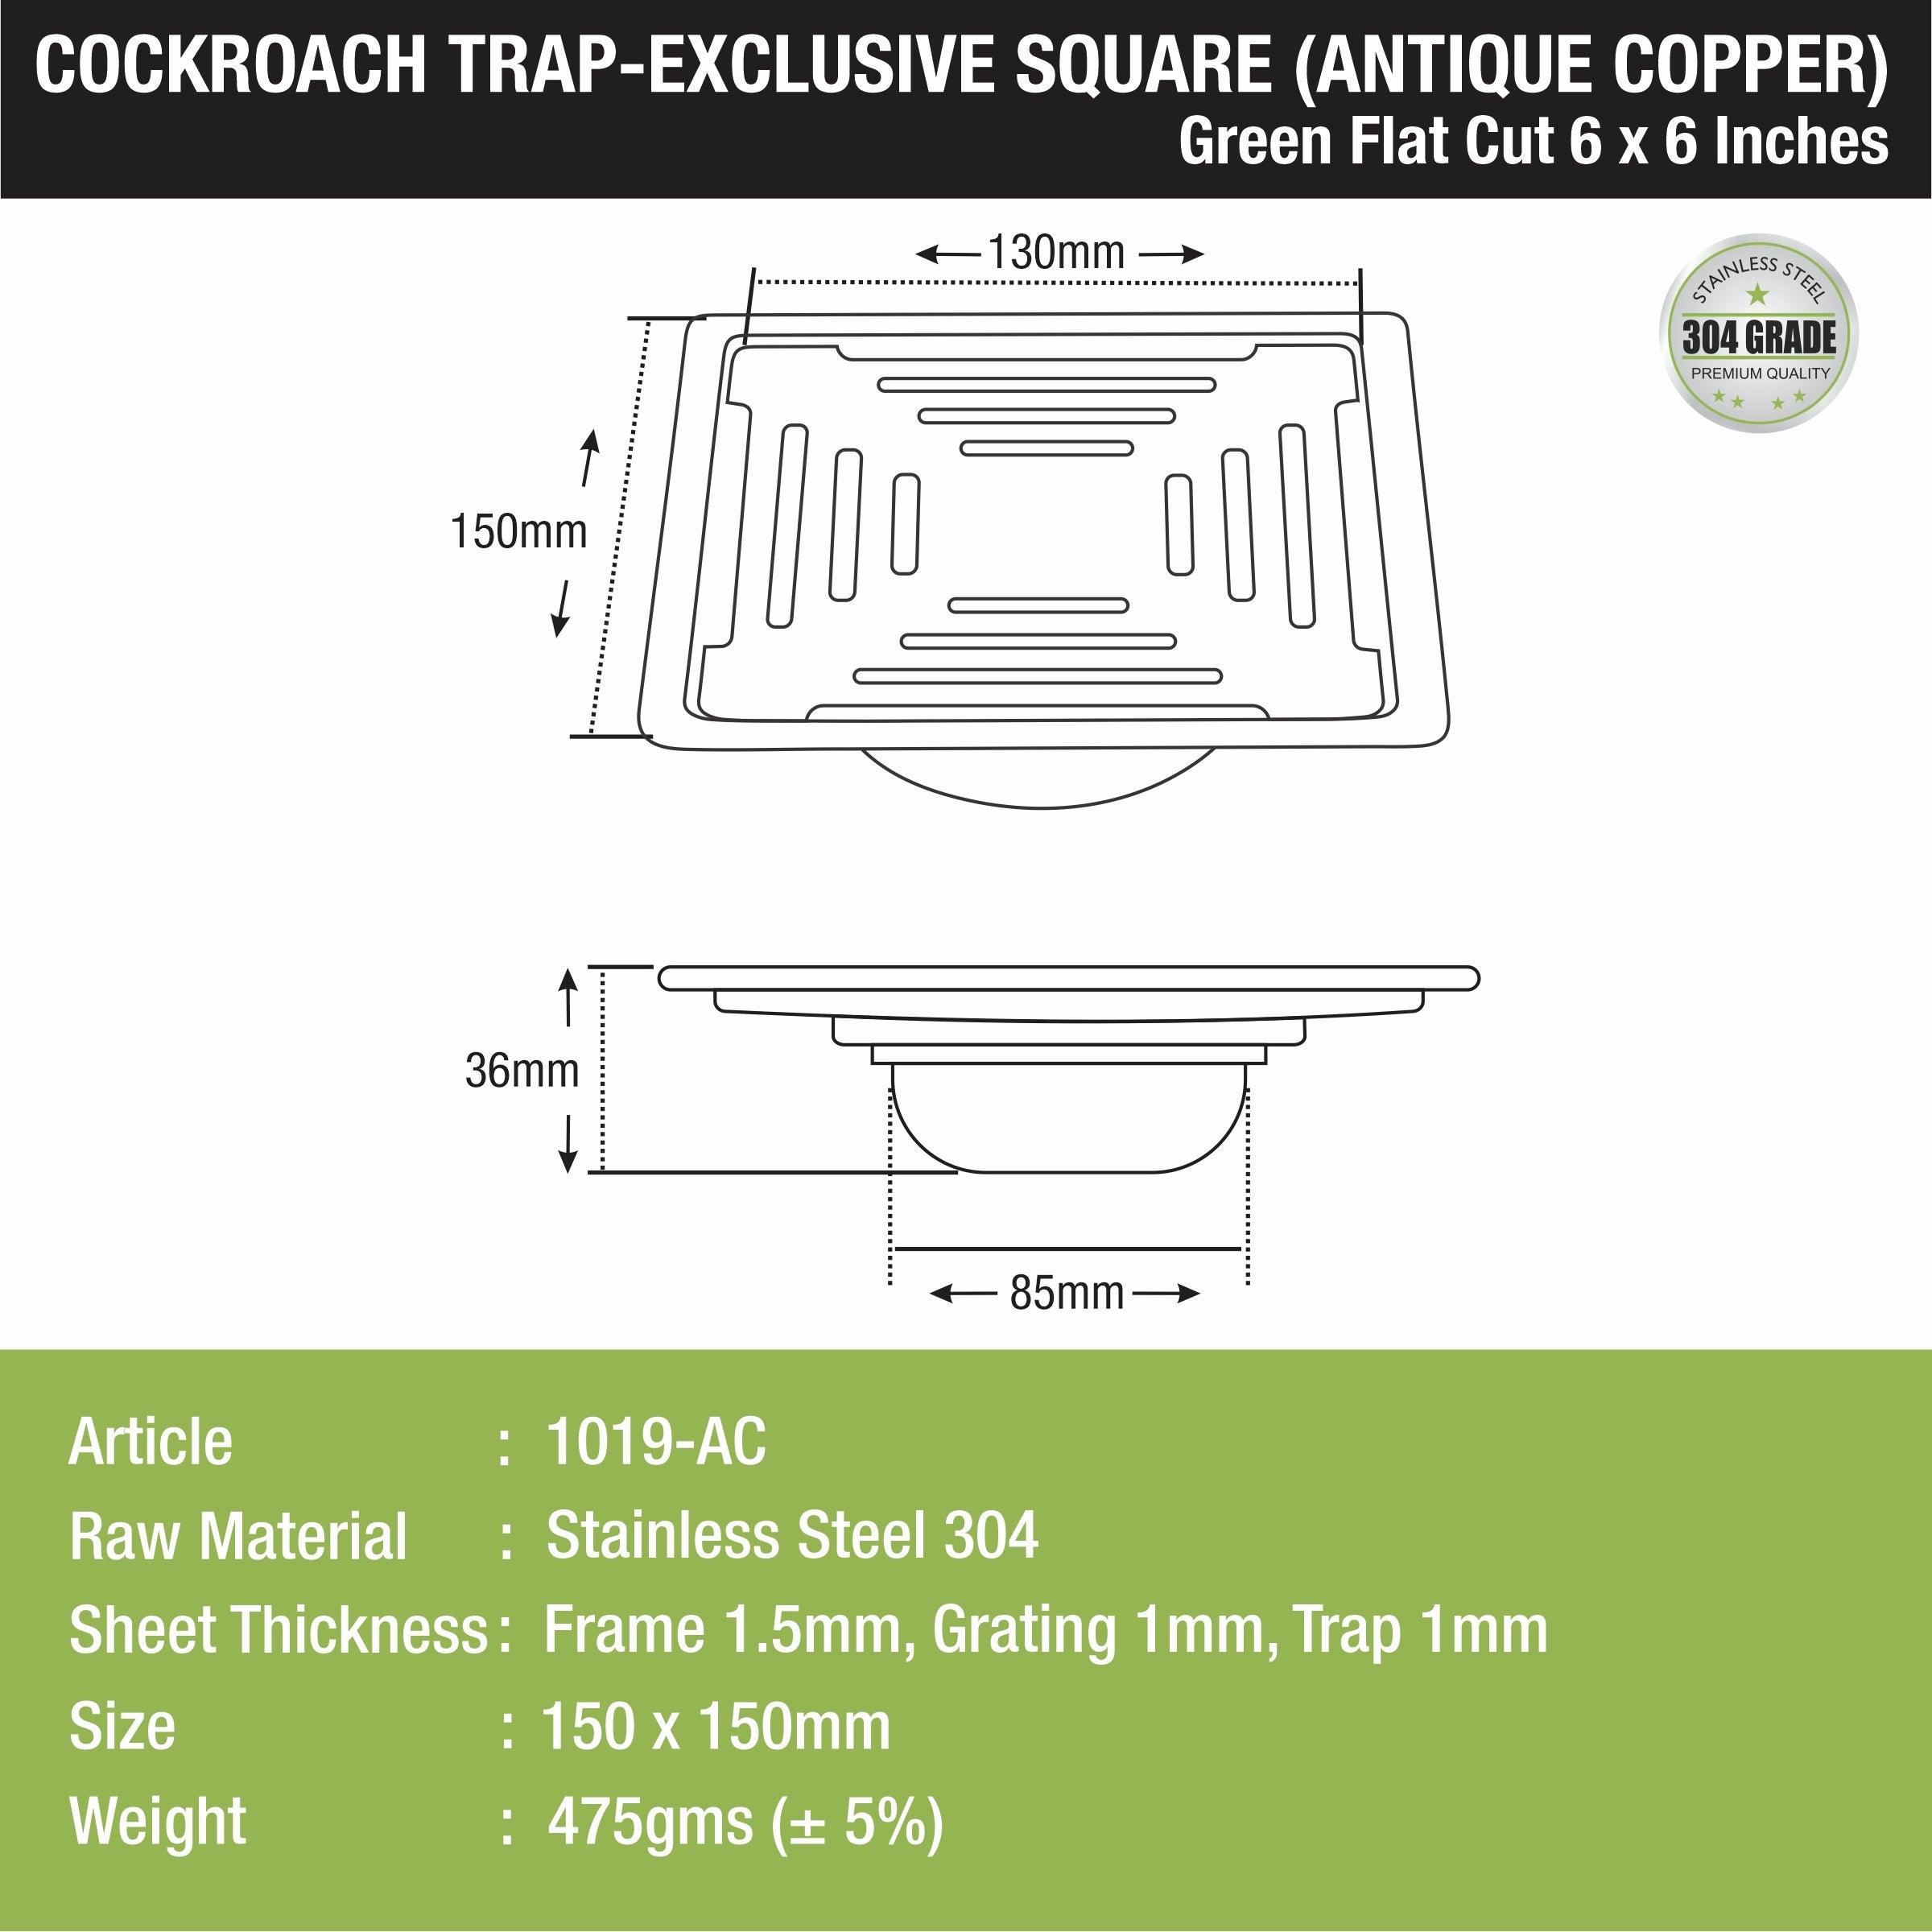 Green Exclusive Square Flat Cut Floor Drain in Antique Copper PVD Coating (6 x 6 Inches) with Cockroach Trap sizes and dimensions